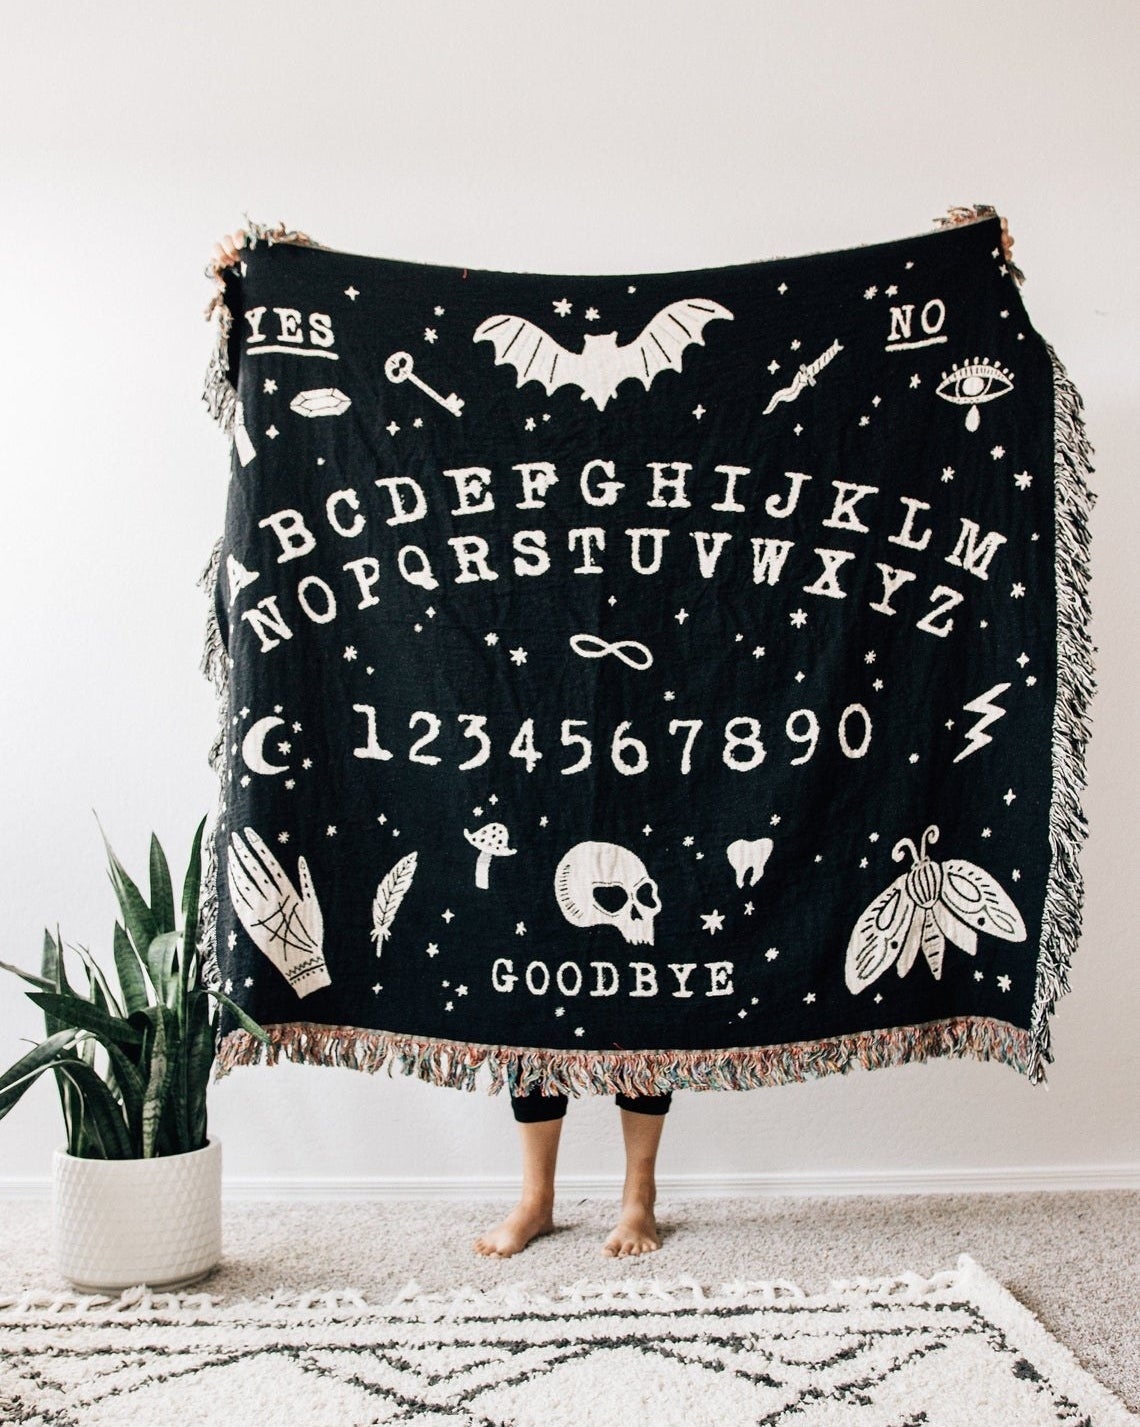 Black blanket with illustrated ouija board and tassels on edges 